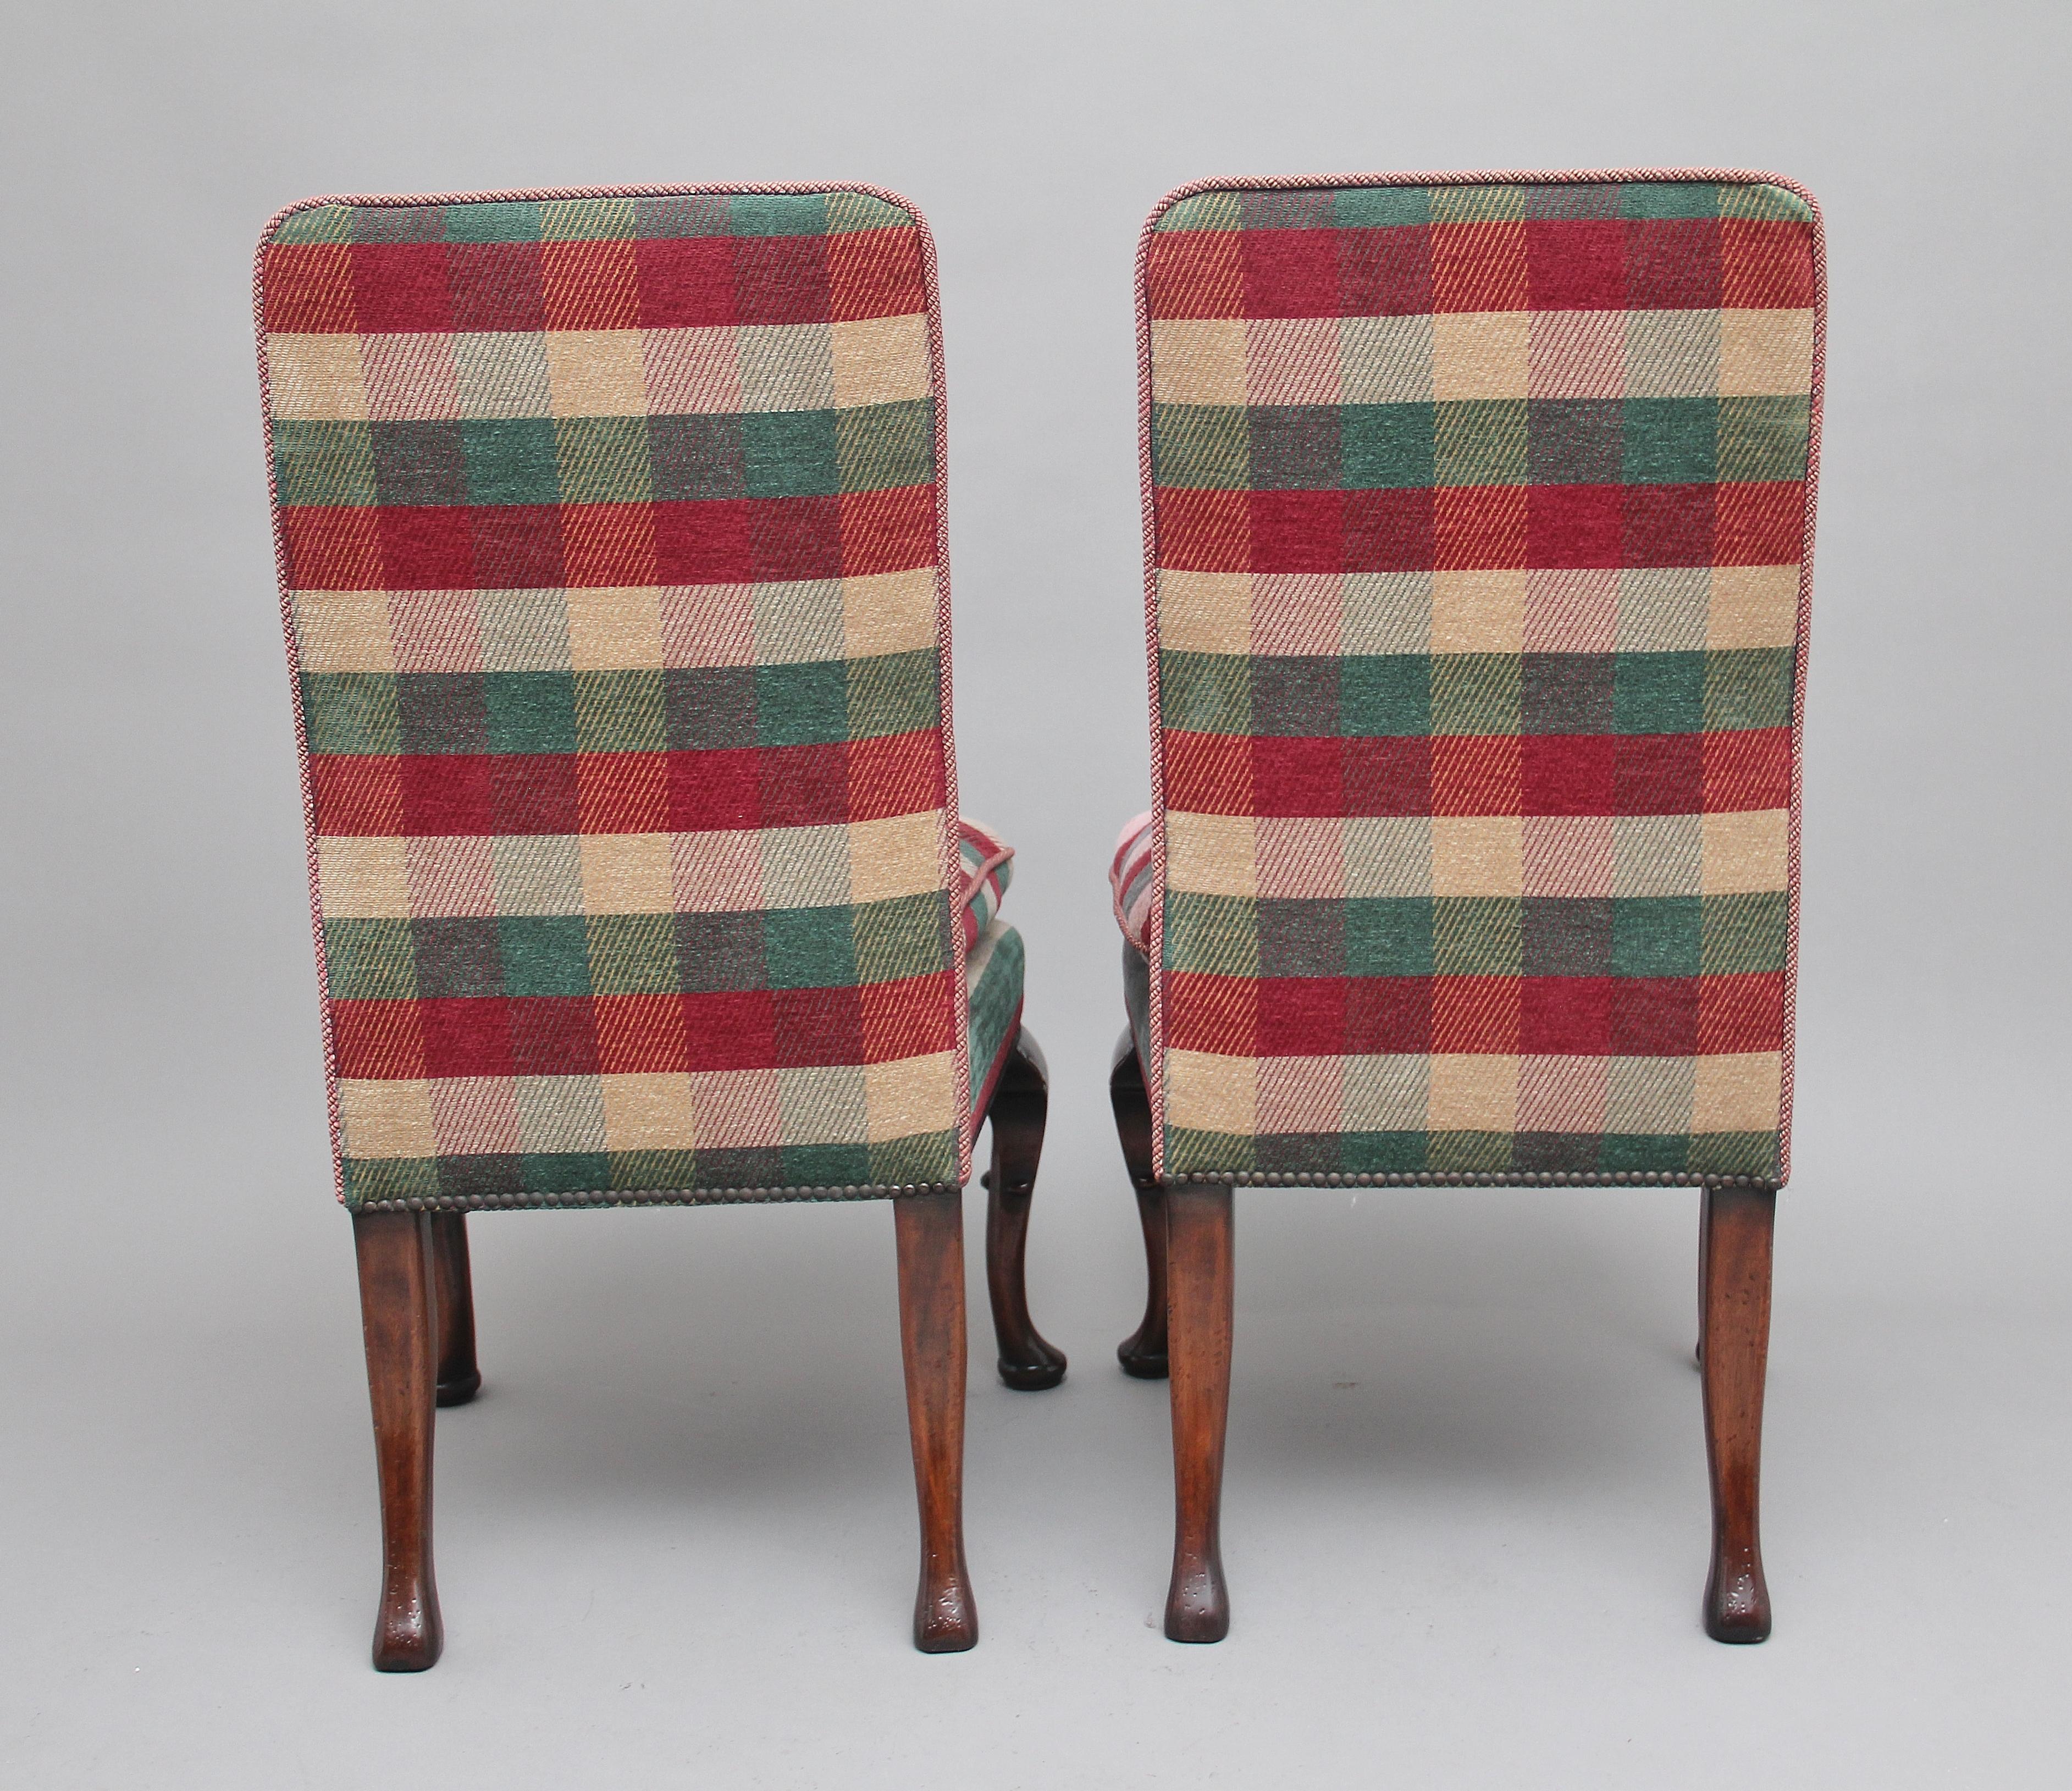 Pair of Upholstered Chairs in the George I Style In Good Condition For Sale In Martlesham, GB